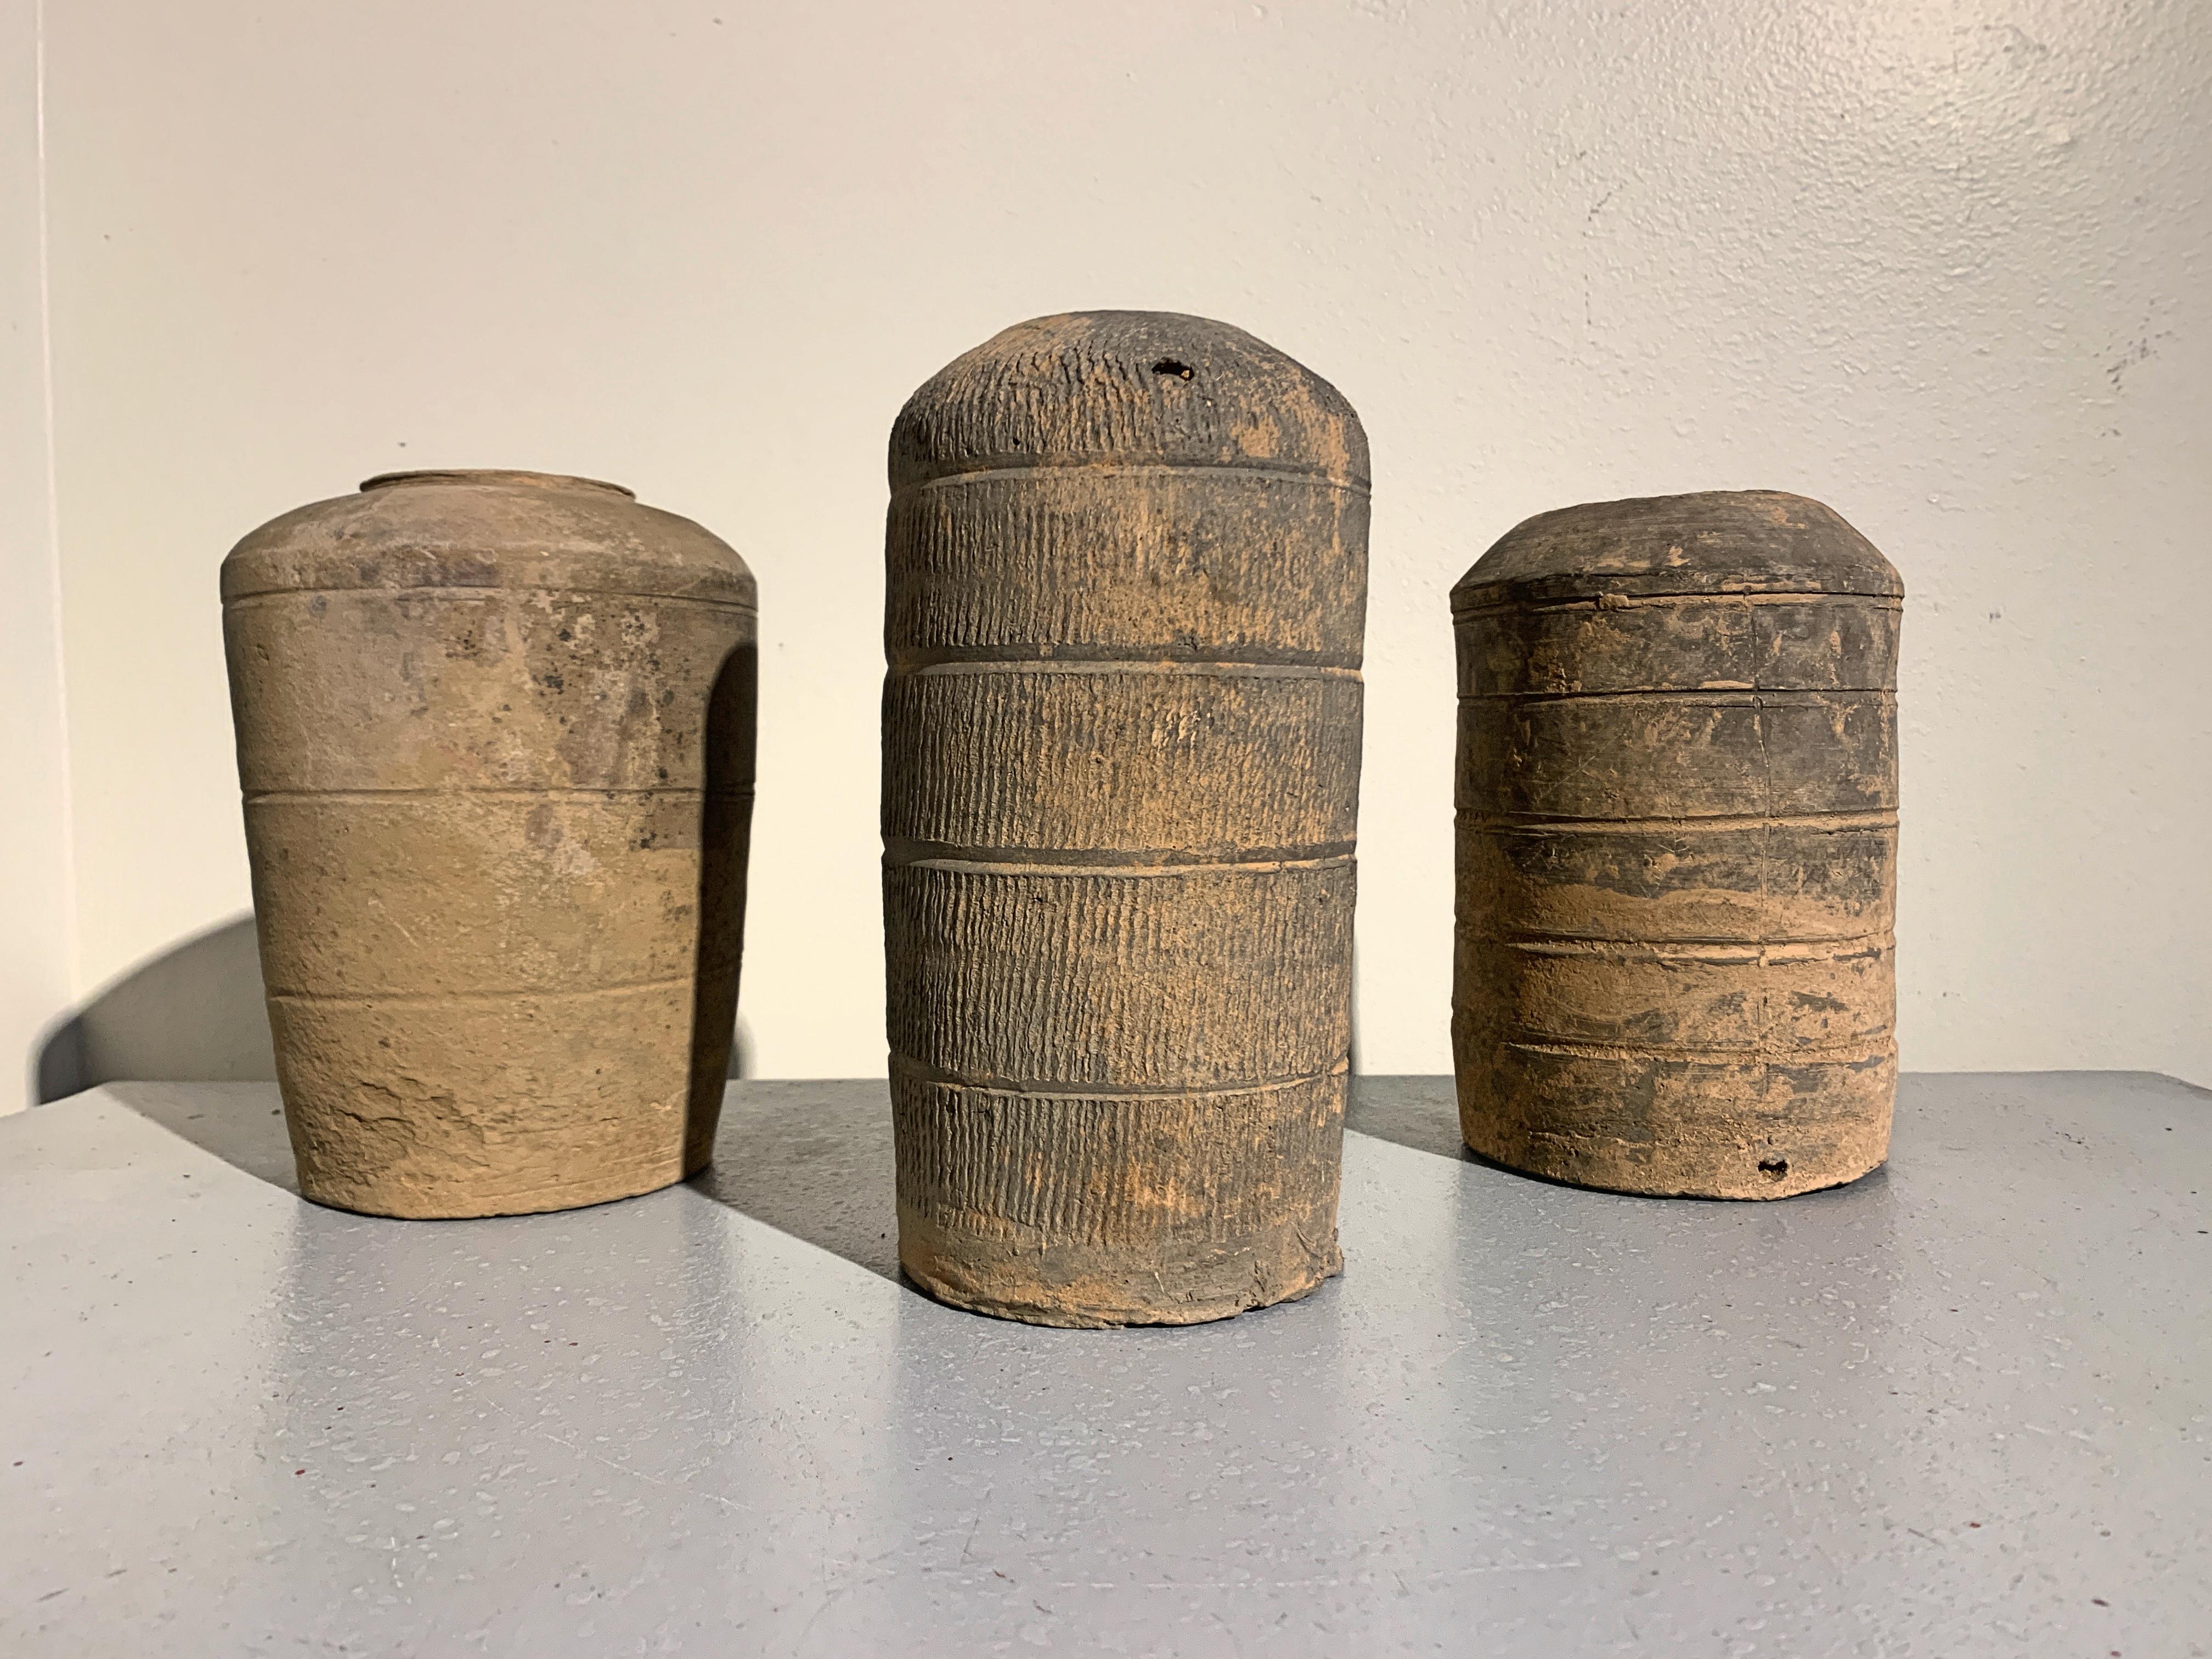 An attractive group of three high fired gray pottery models of granaries, Han dynasty (206 BC-220 AD) style, and most likely of the period, China.

The granary models of varying cylindrical form, with slightly domed tops and circular openings. The